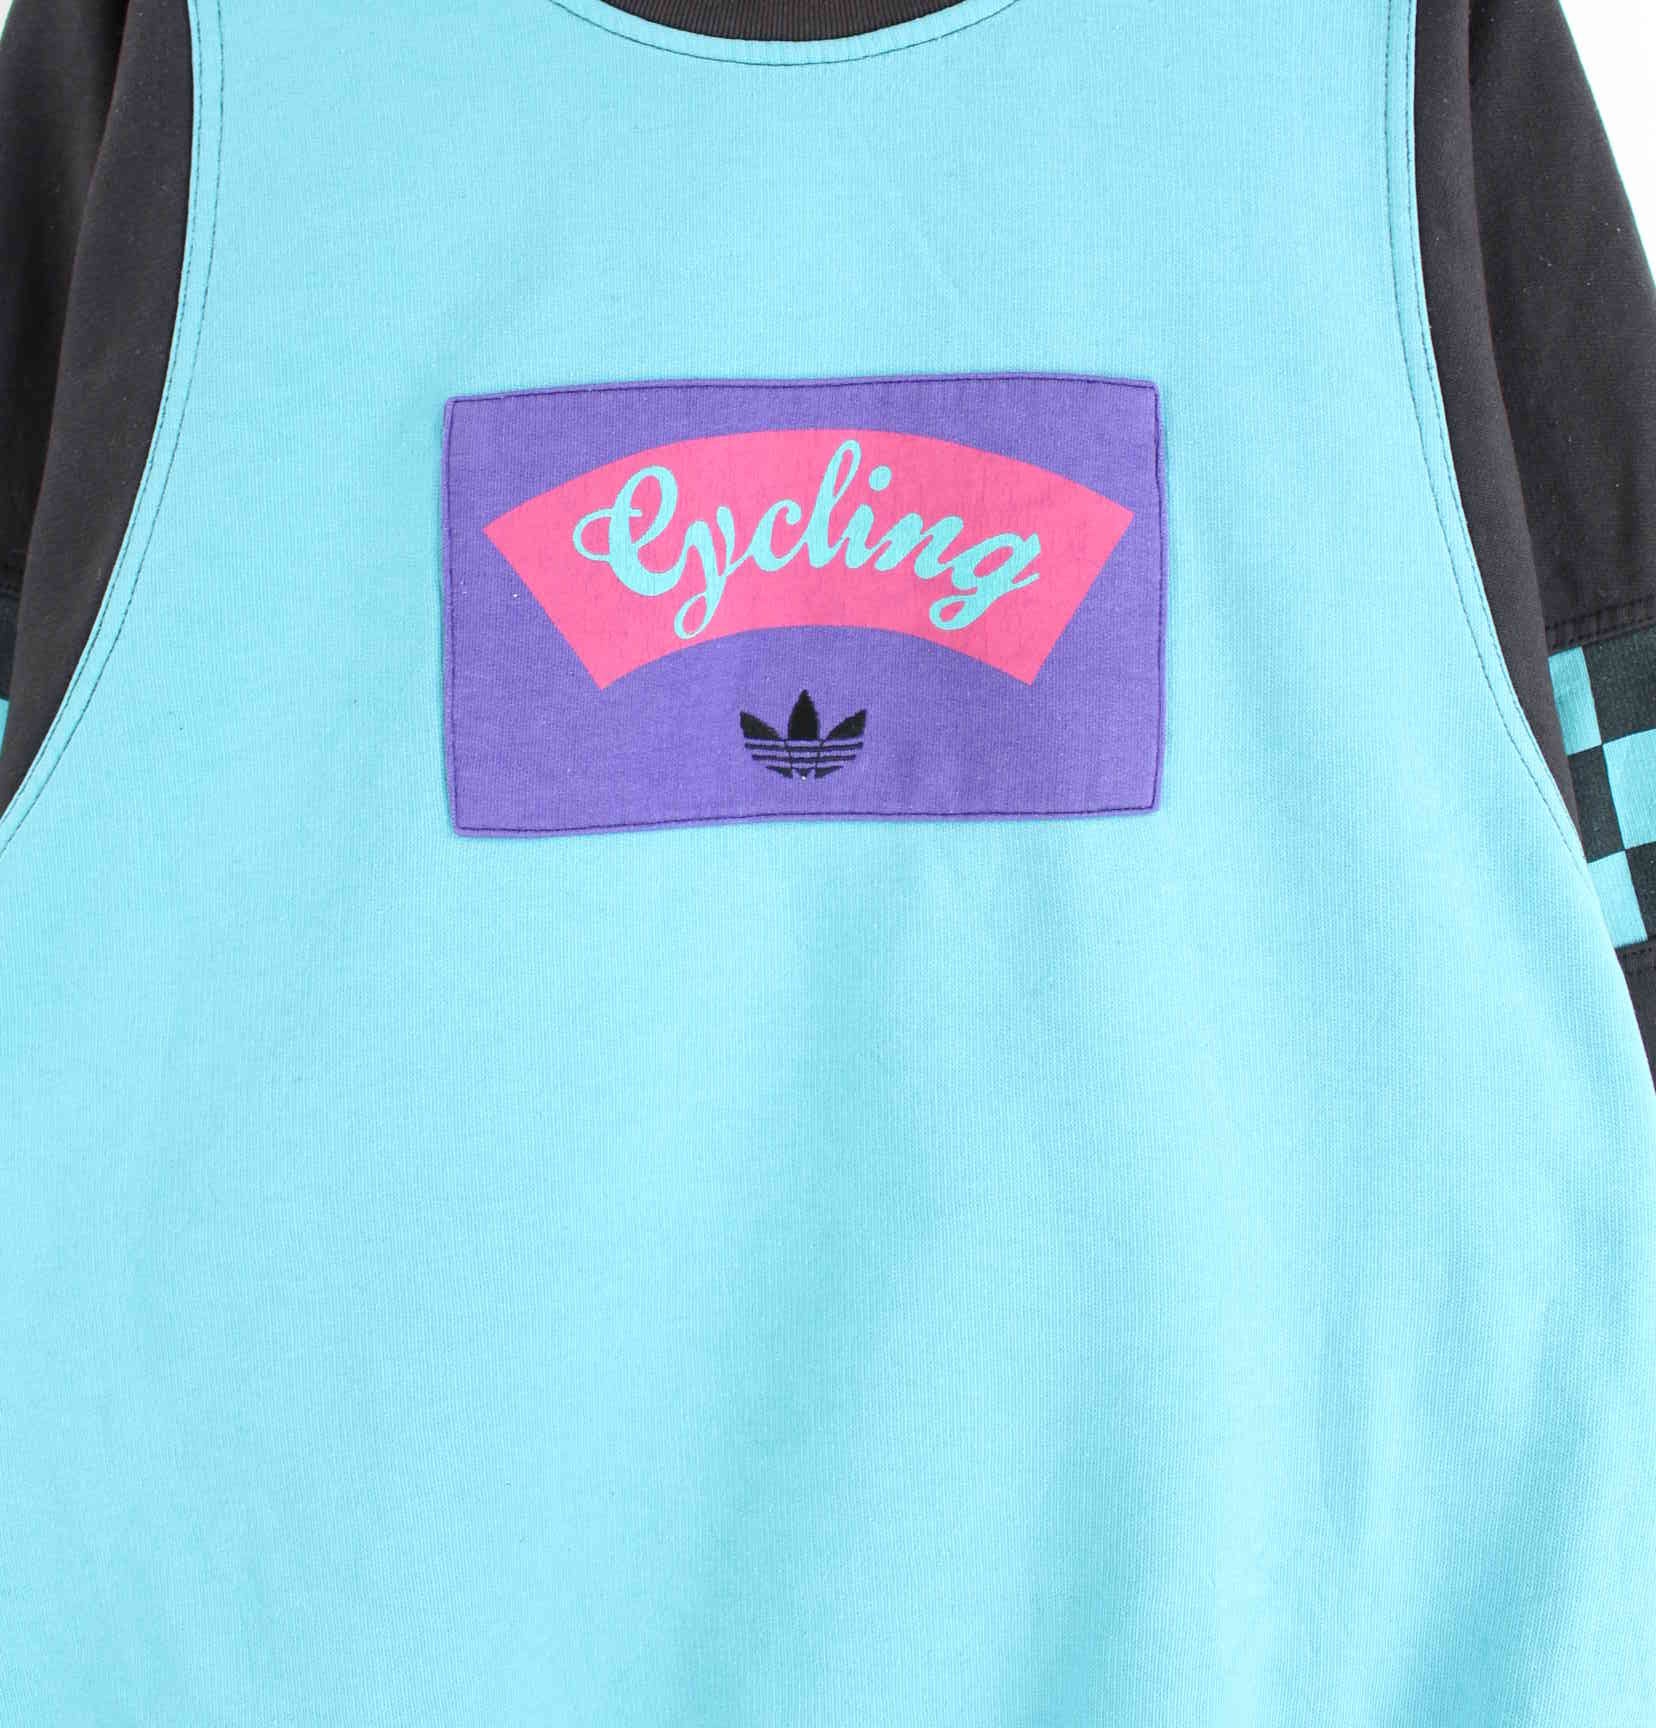 Adidas 80s Vintage Takeoff Cycling Embroidered Sweater Türkis XL (detail image 1)